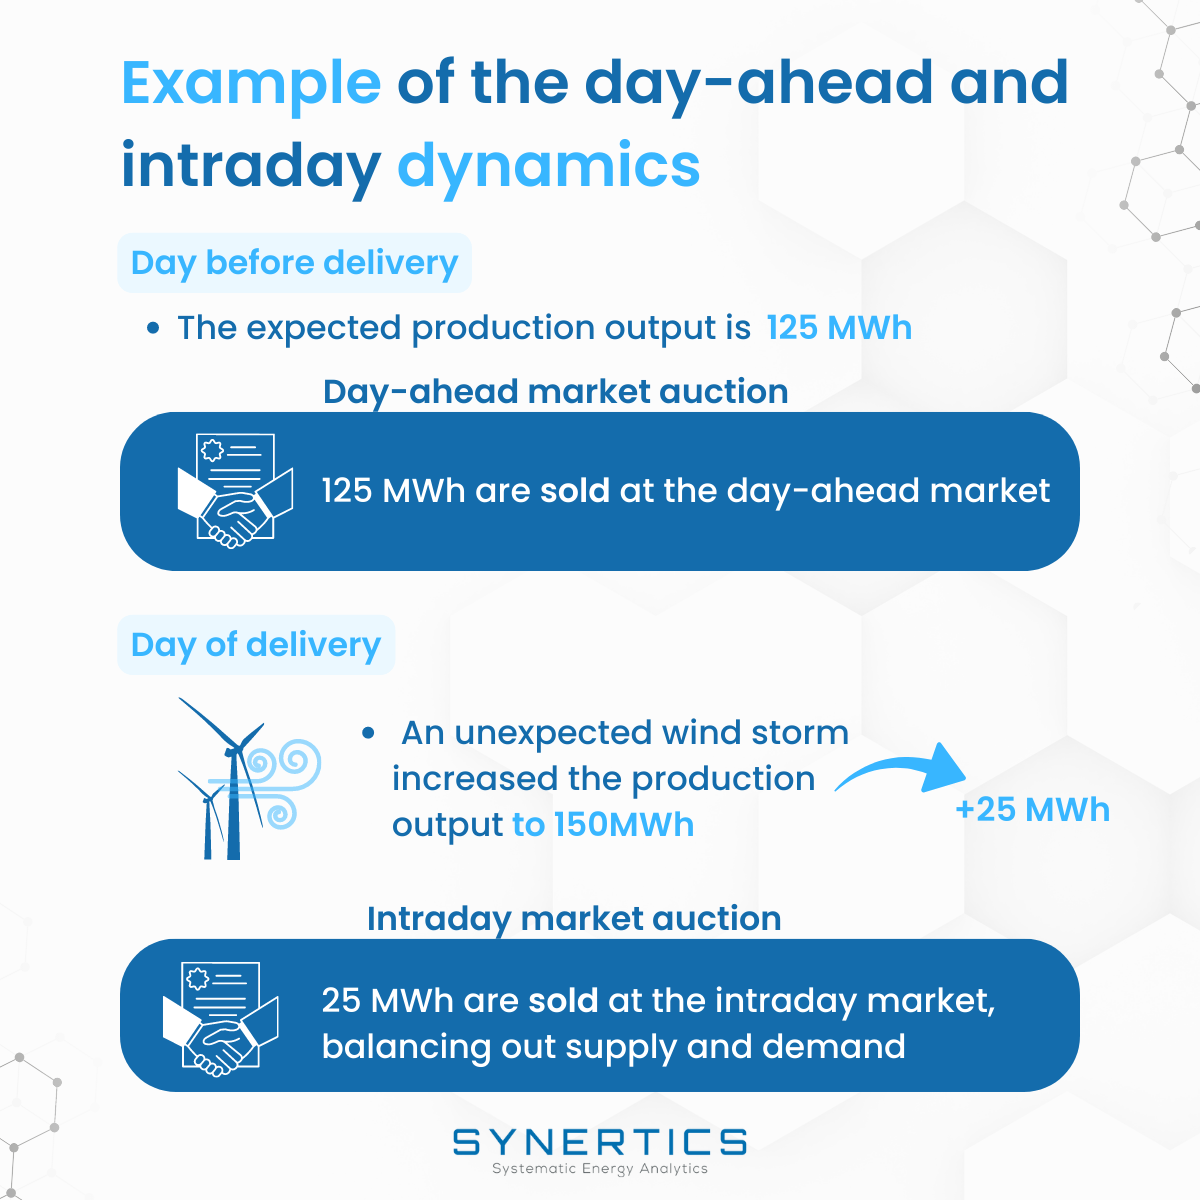 Example of the day-ahead and intraday dynamics